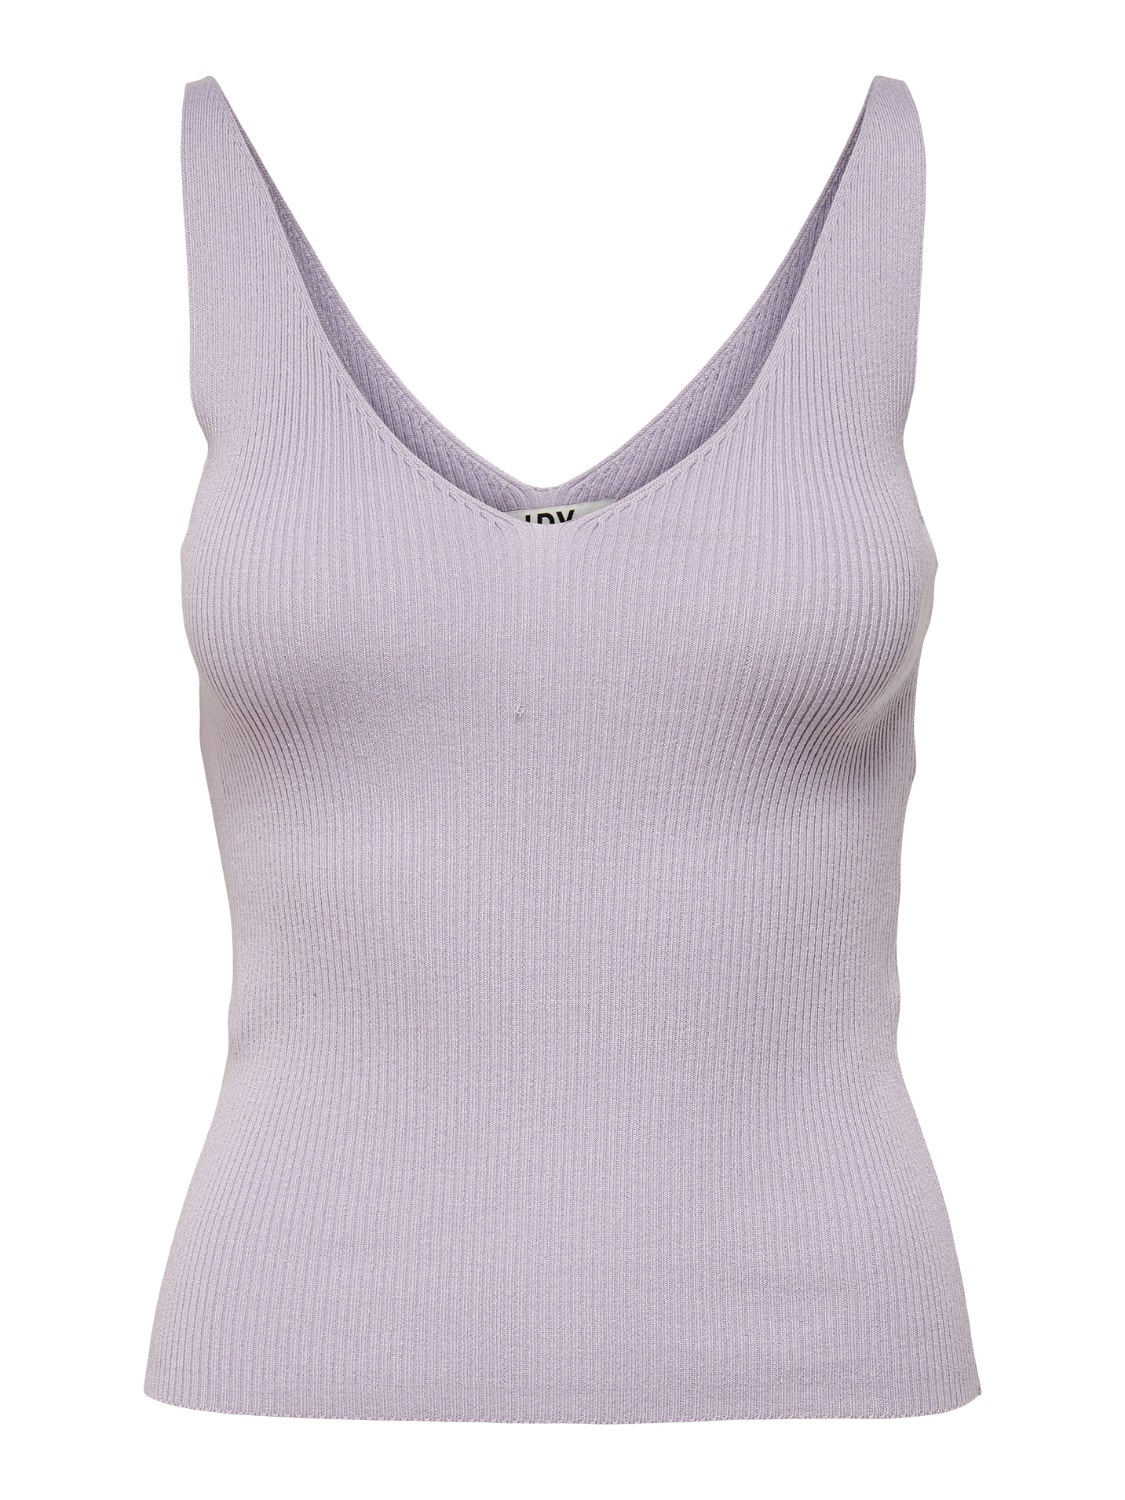 ONLY V-neck Top -Pastel Lilac - 15180497